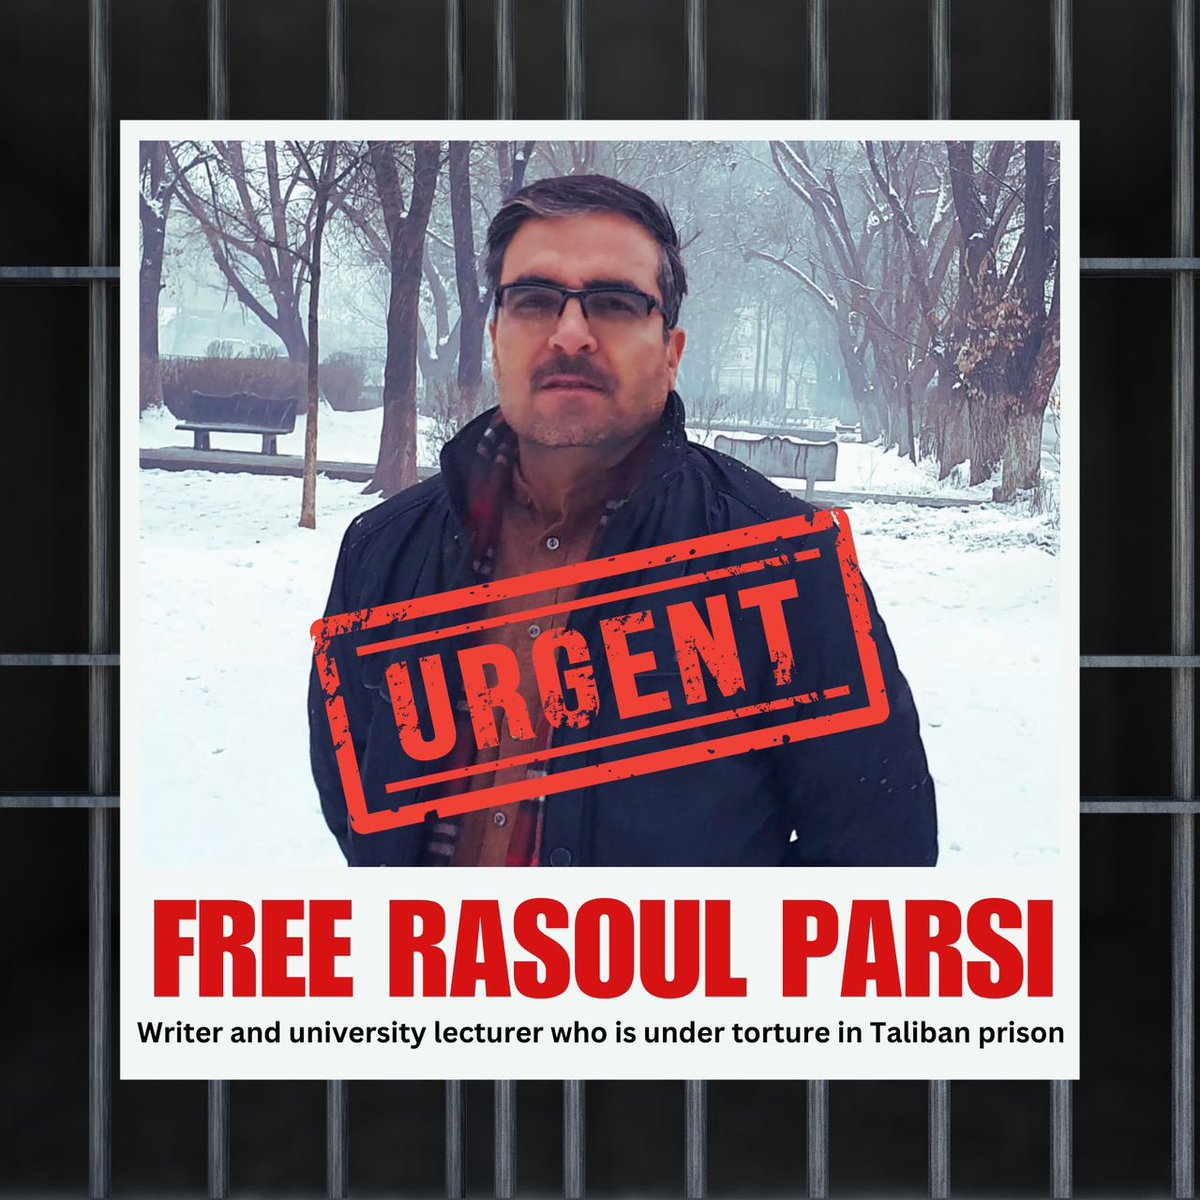 Education is a basic human right,  supporting education is not a crime. Arresting Matiullah Wesa , Rasoul Parsi  and others for no reason is a crime !!!
#FreeWesa #FreeRasoulParsi
 #EducationPrev